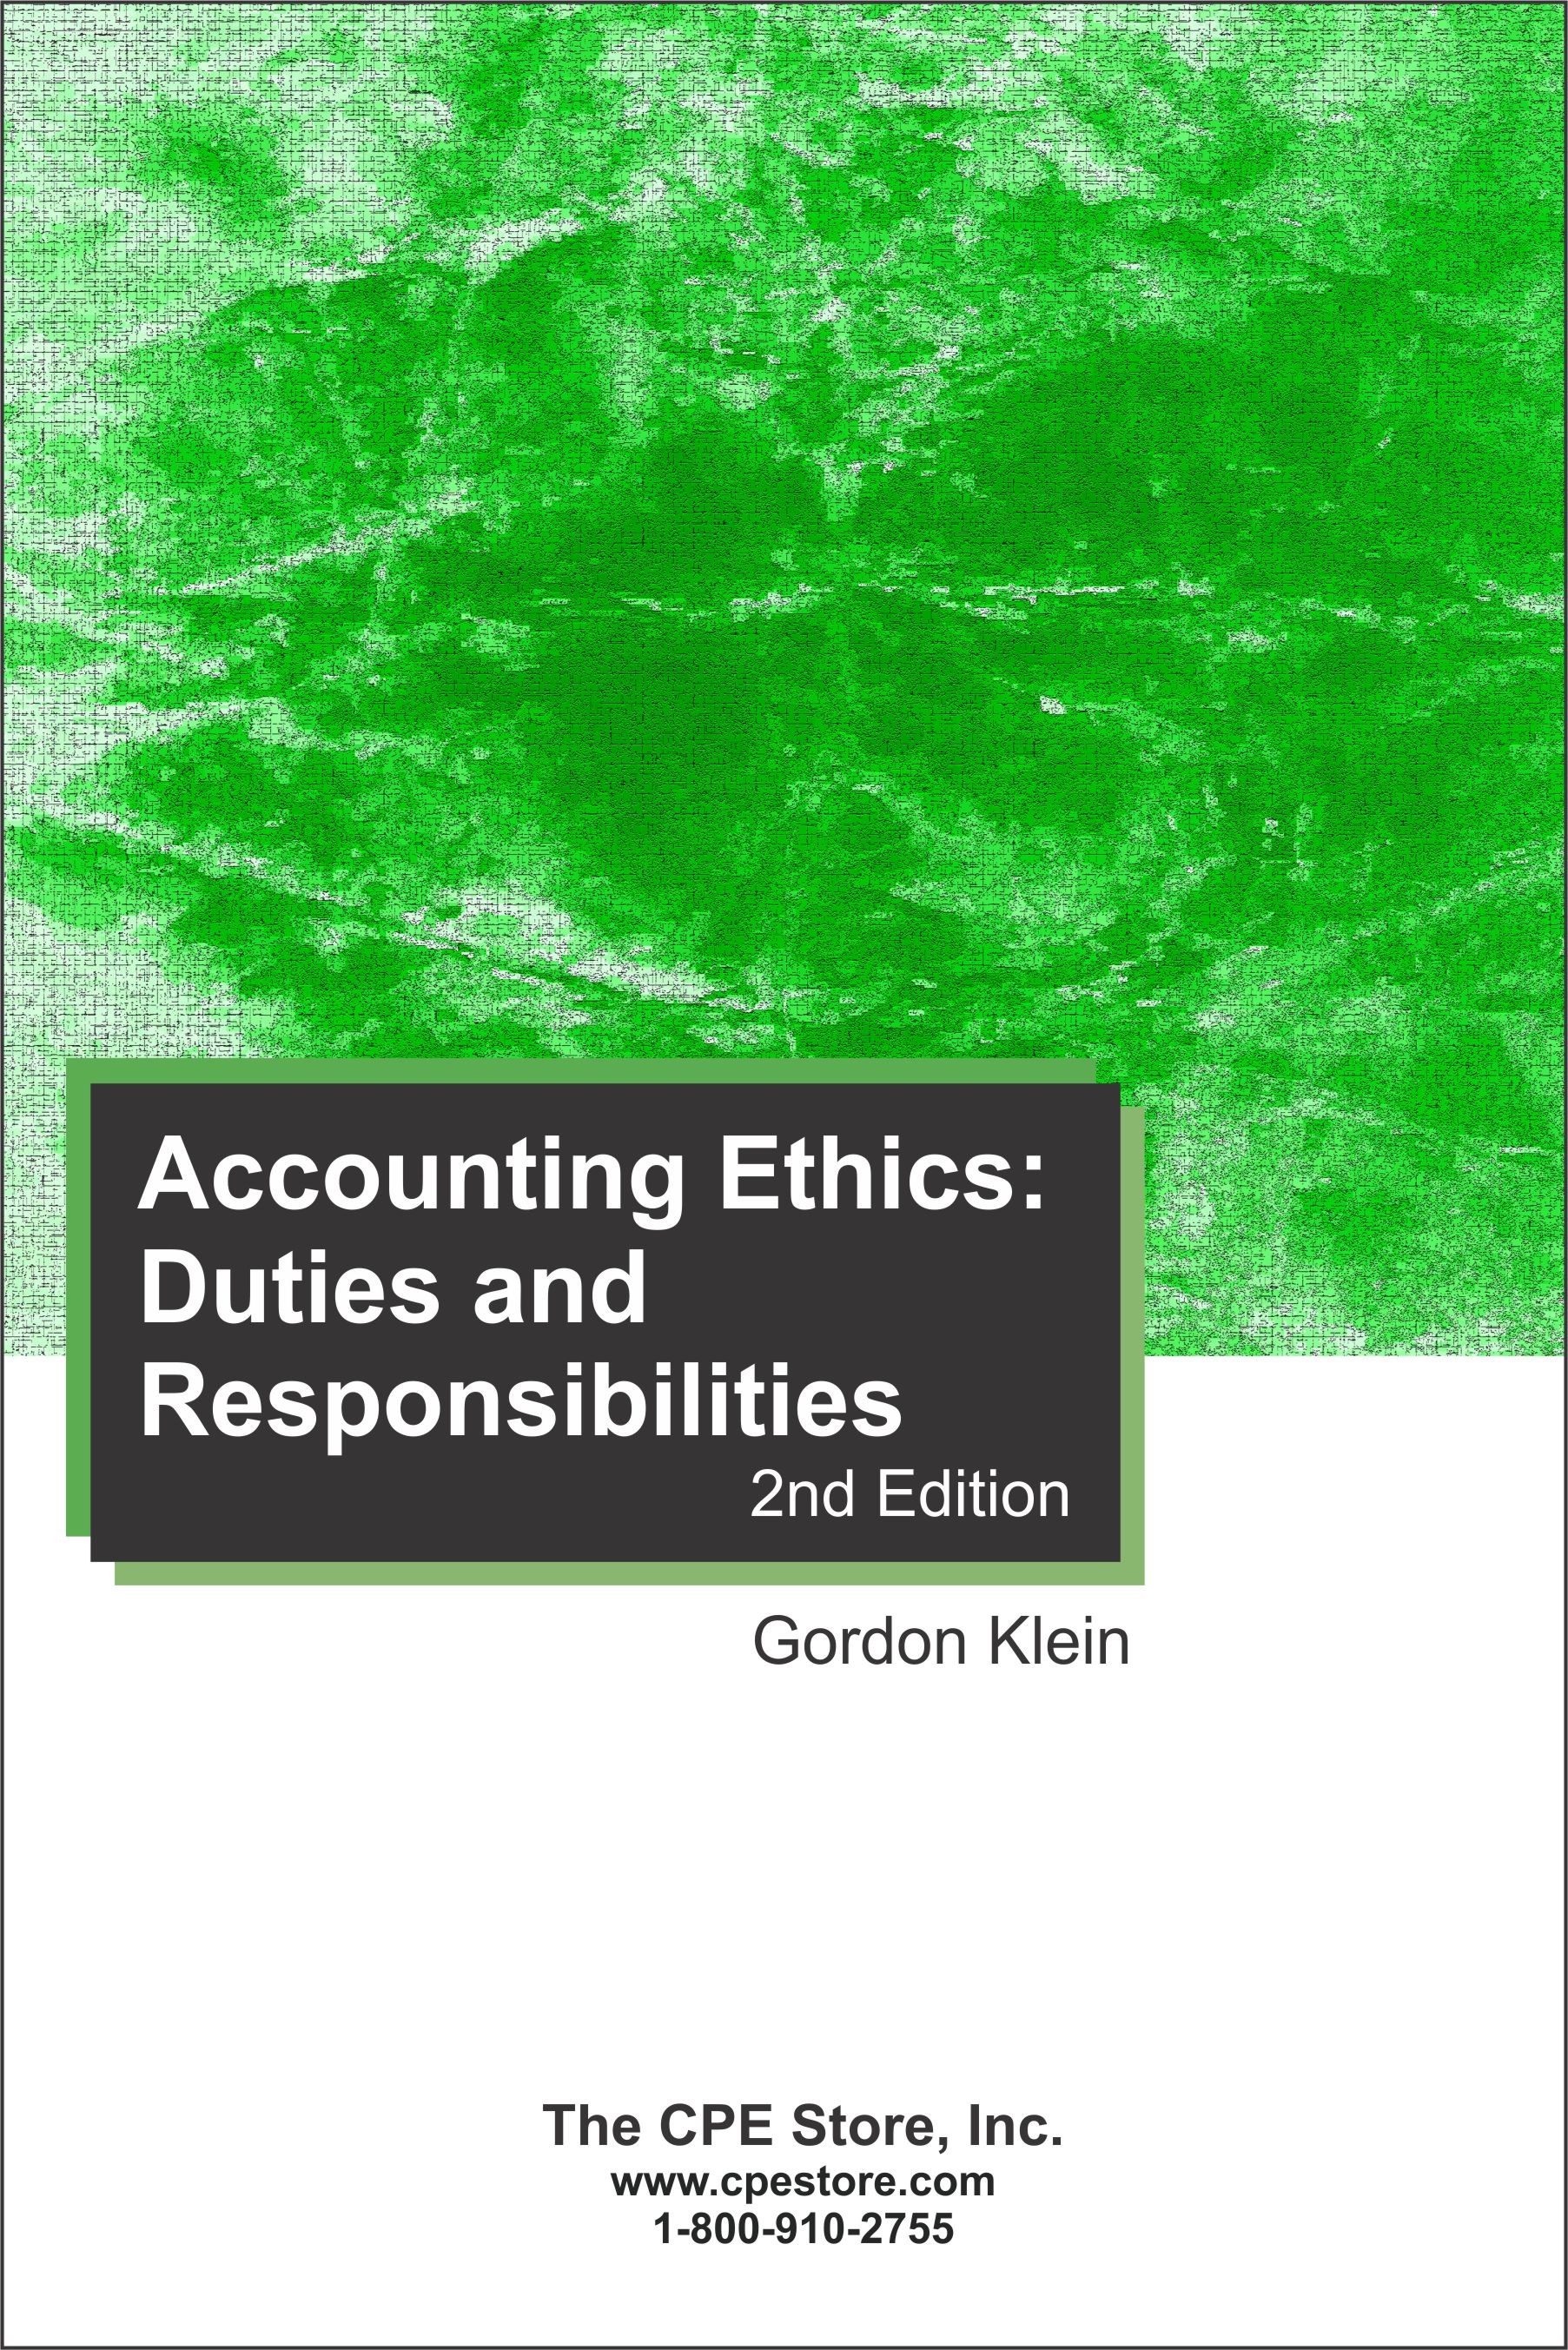 Accounting Ethics: Duties and Responsibilities